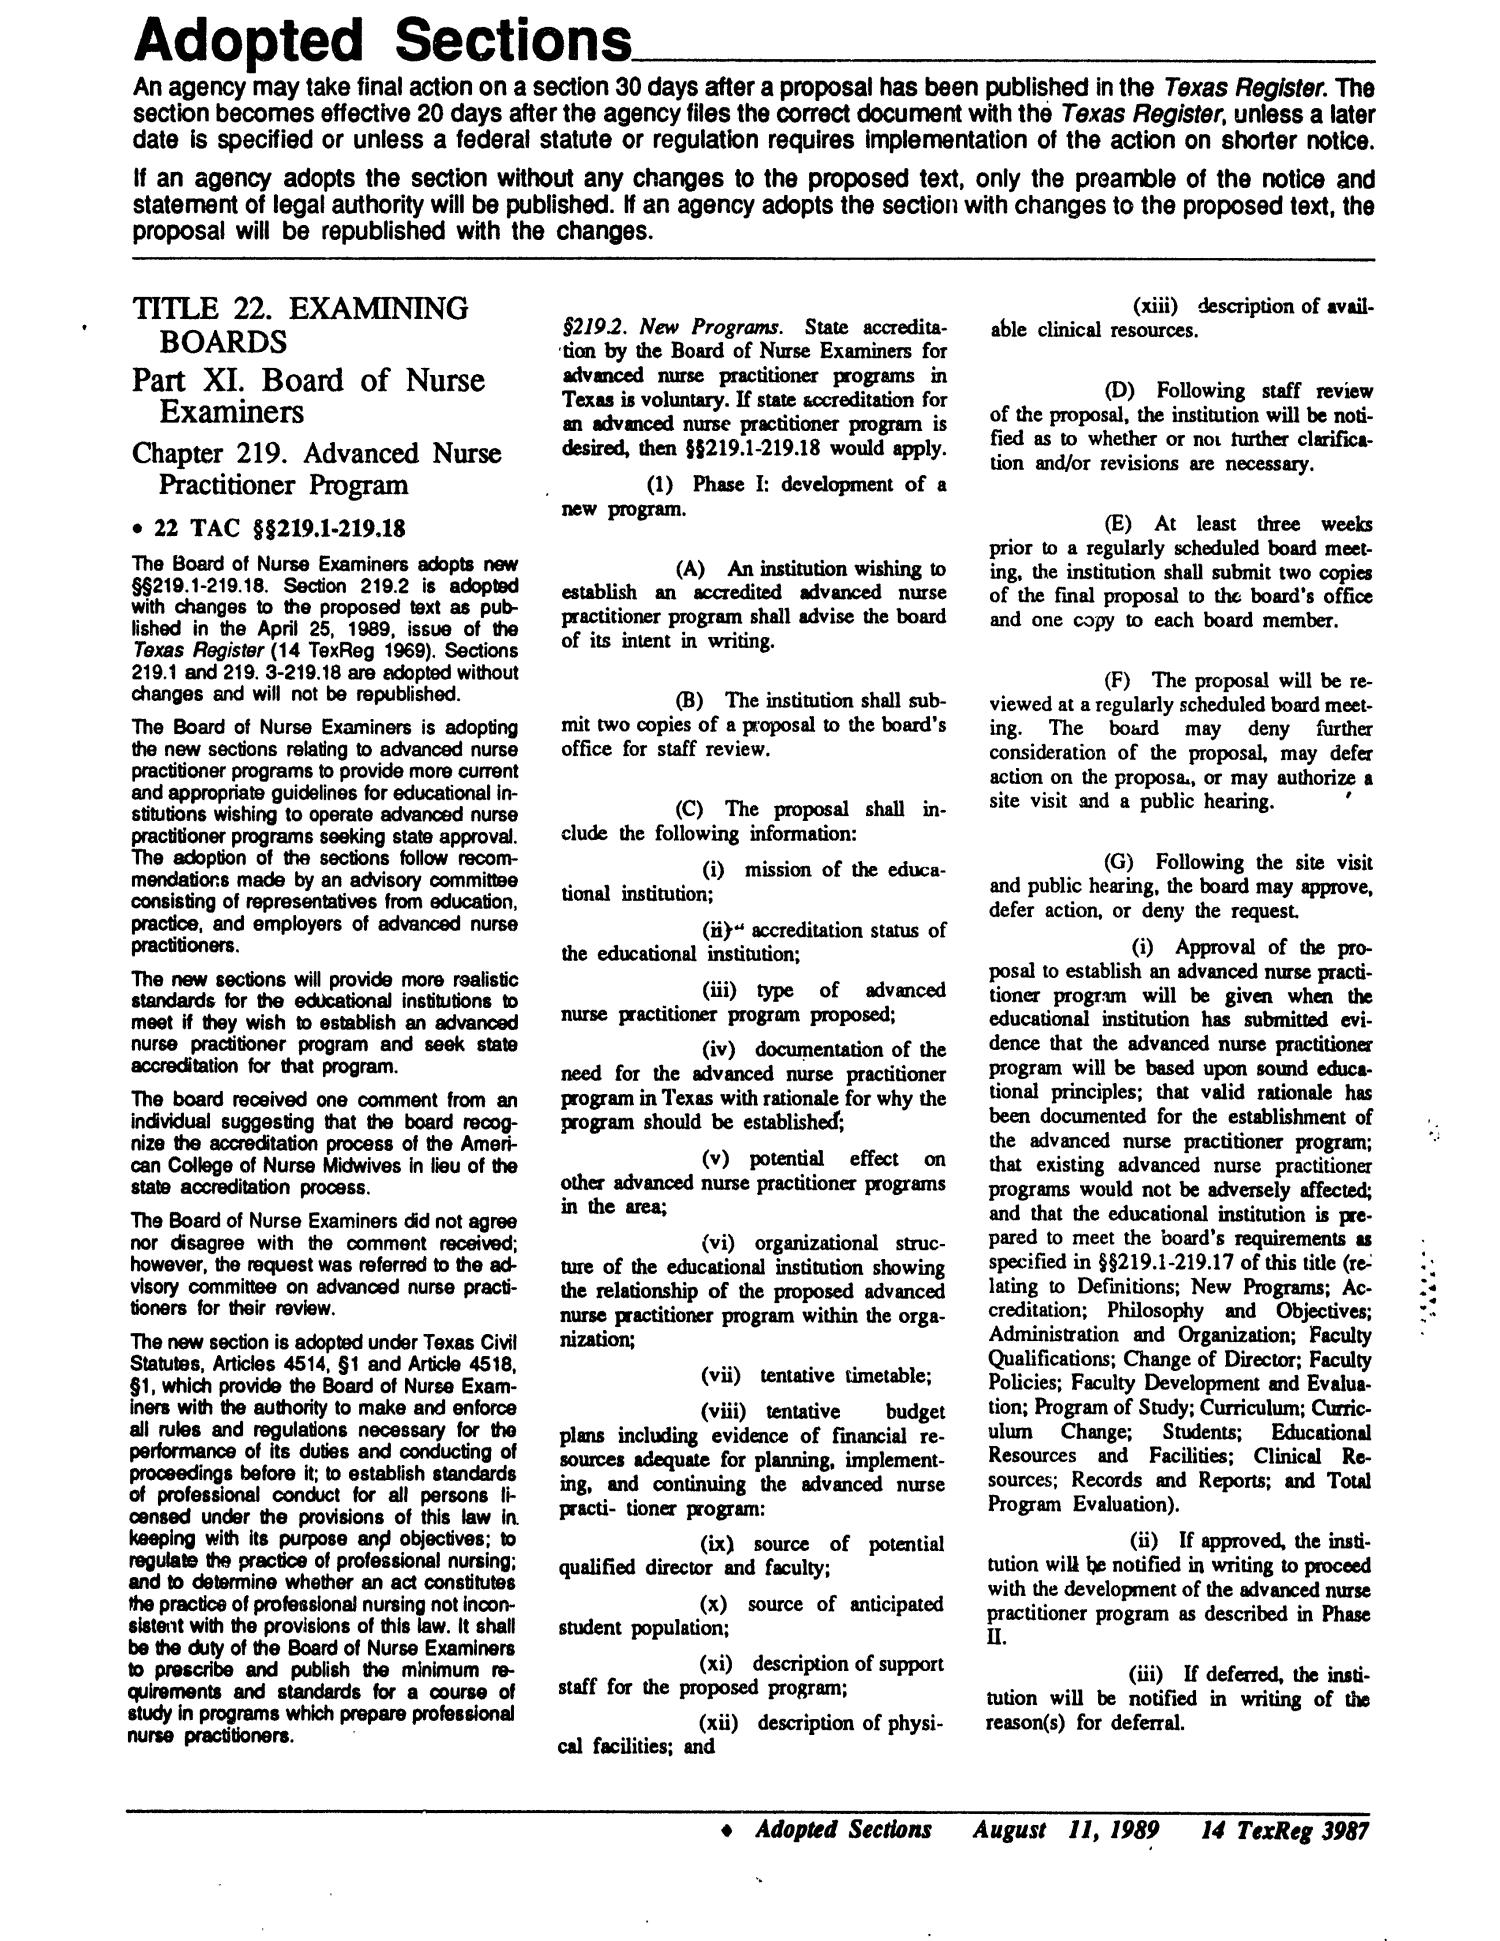 Texas Register, Volume 14, Number 58, Pages 3953-4016, August 11, 1989
                                                
                                                    3987
                                                